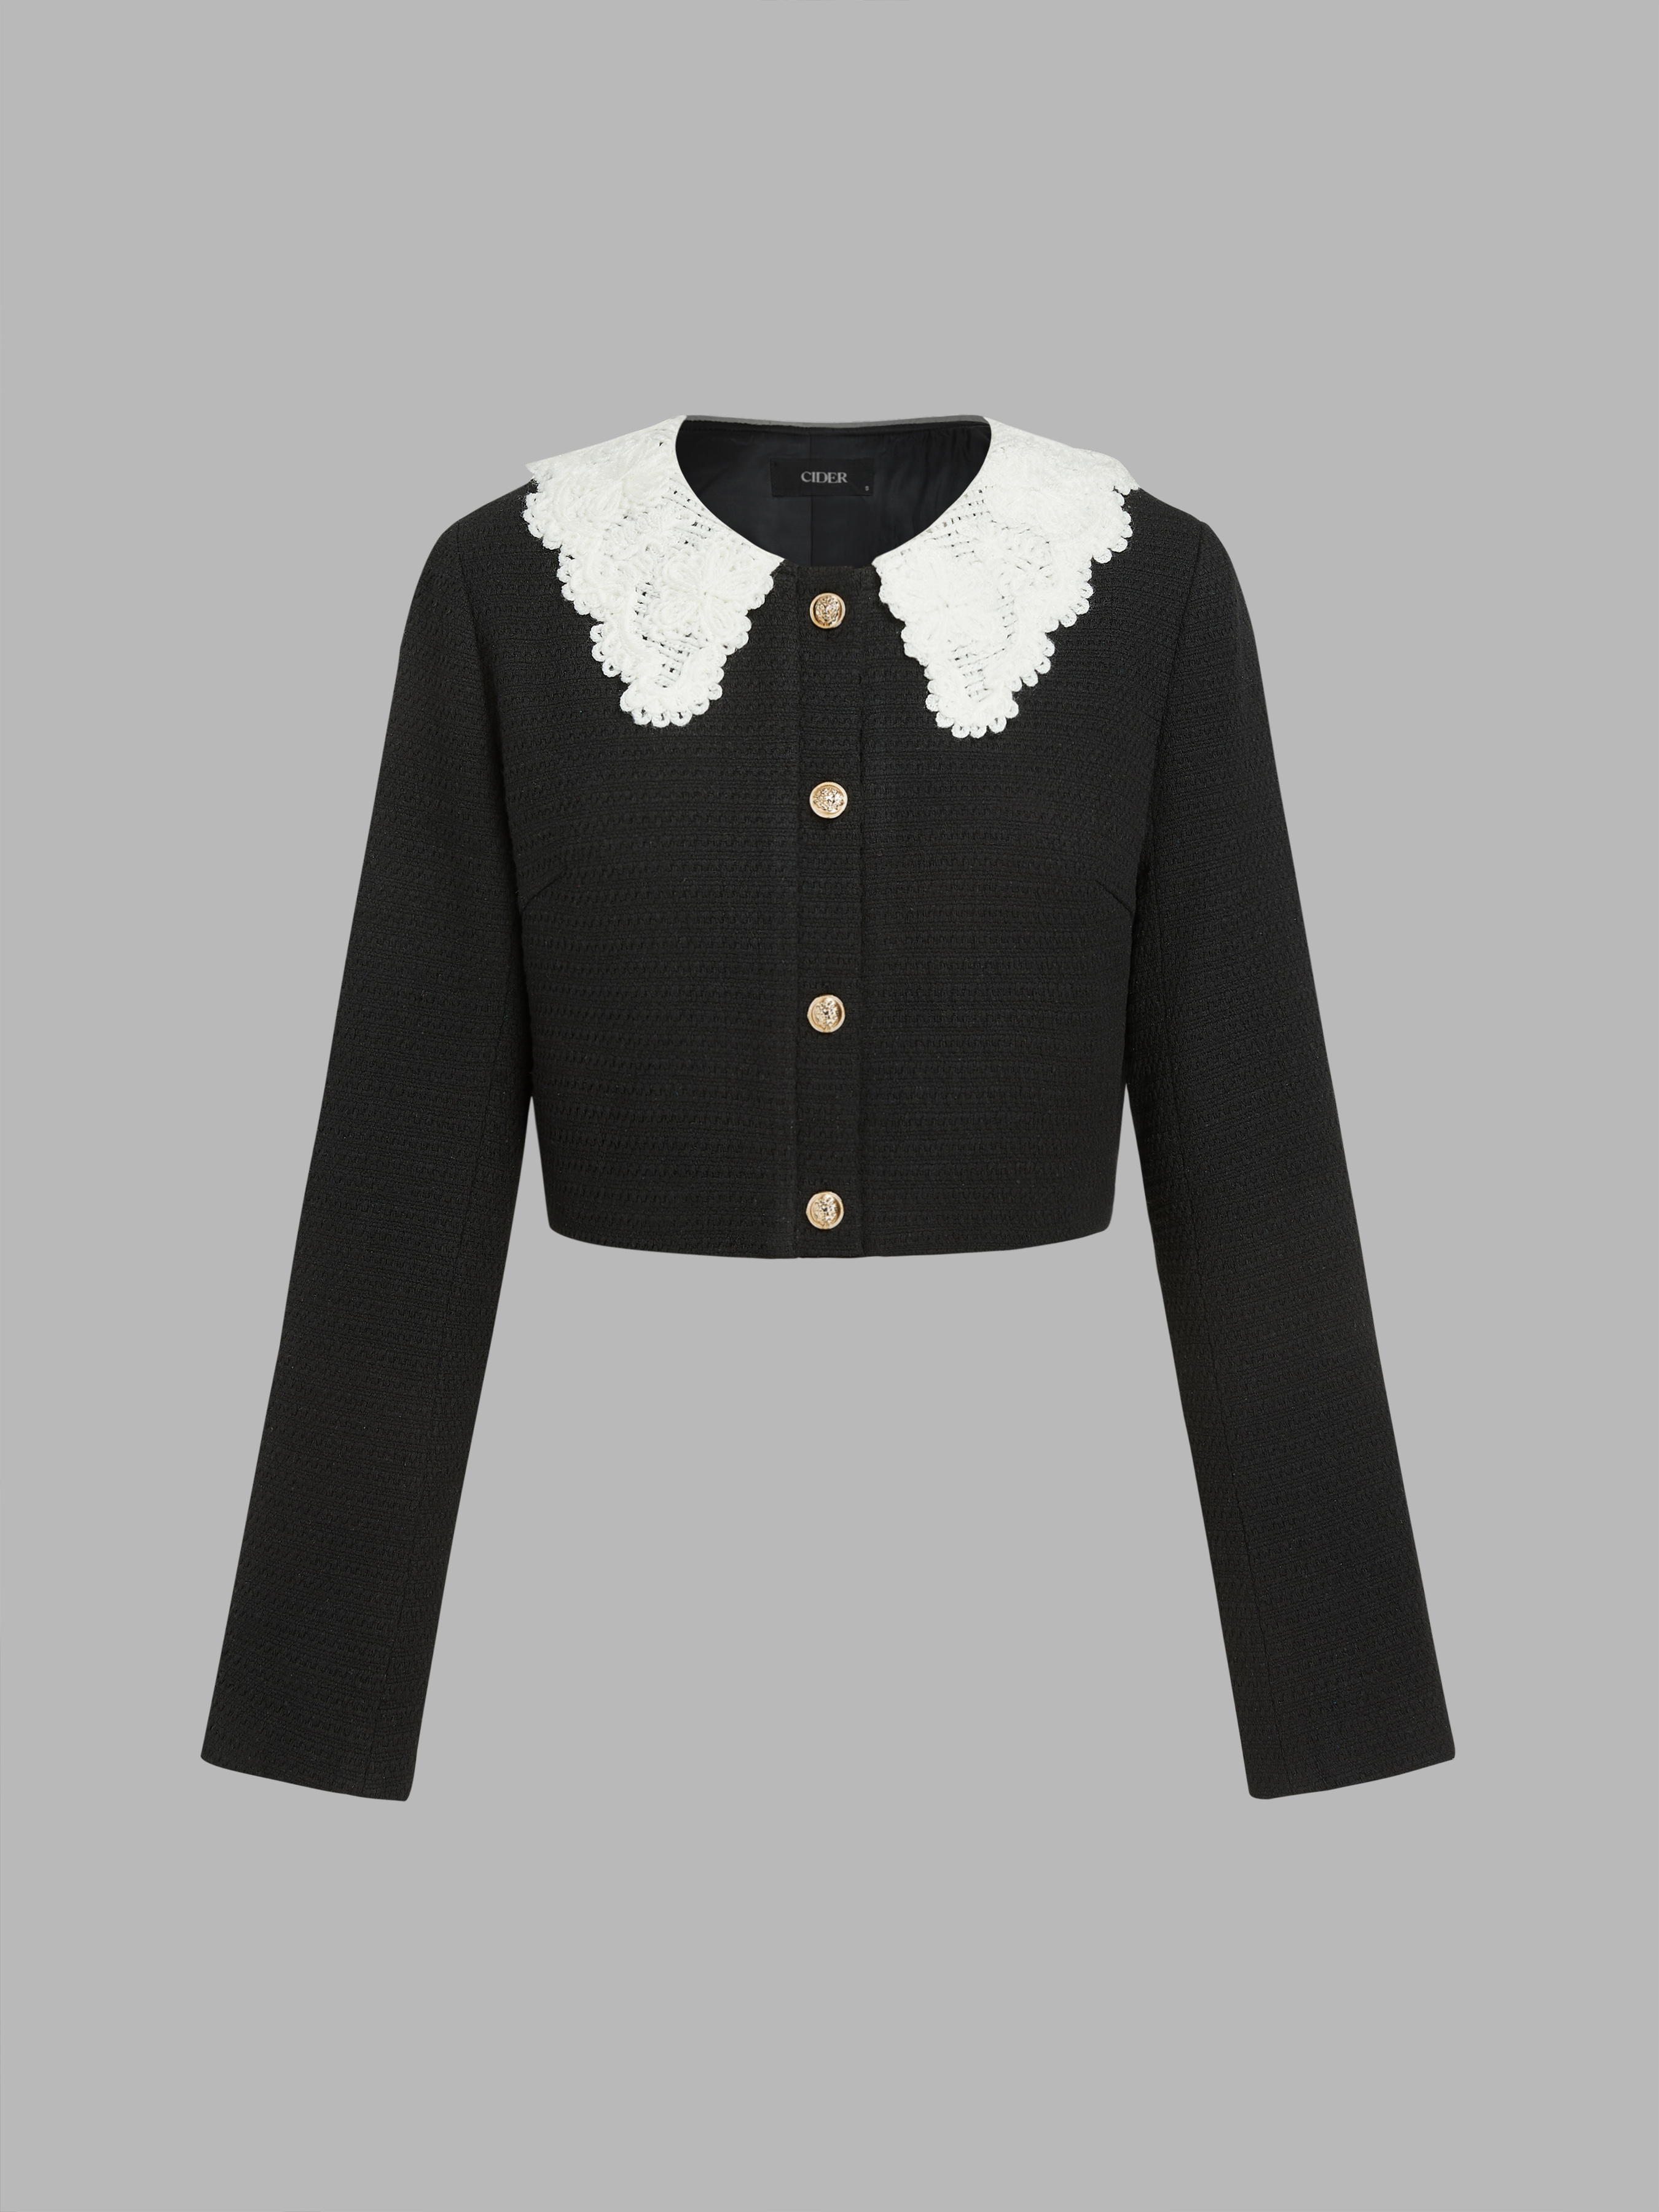 Woven Doll Collar Button Jacket - Cider